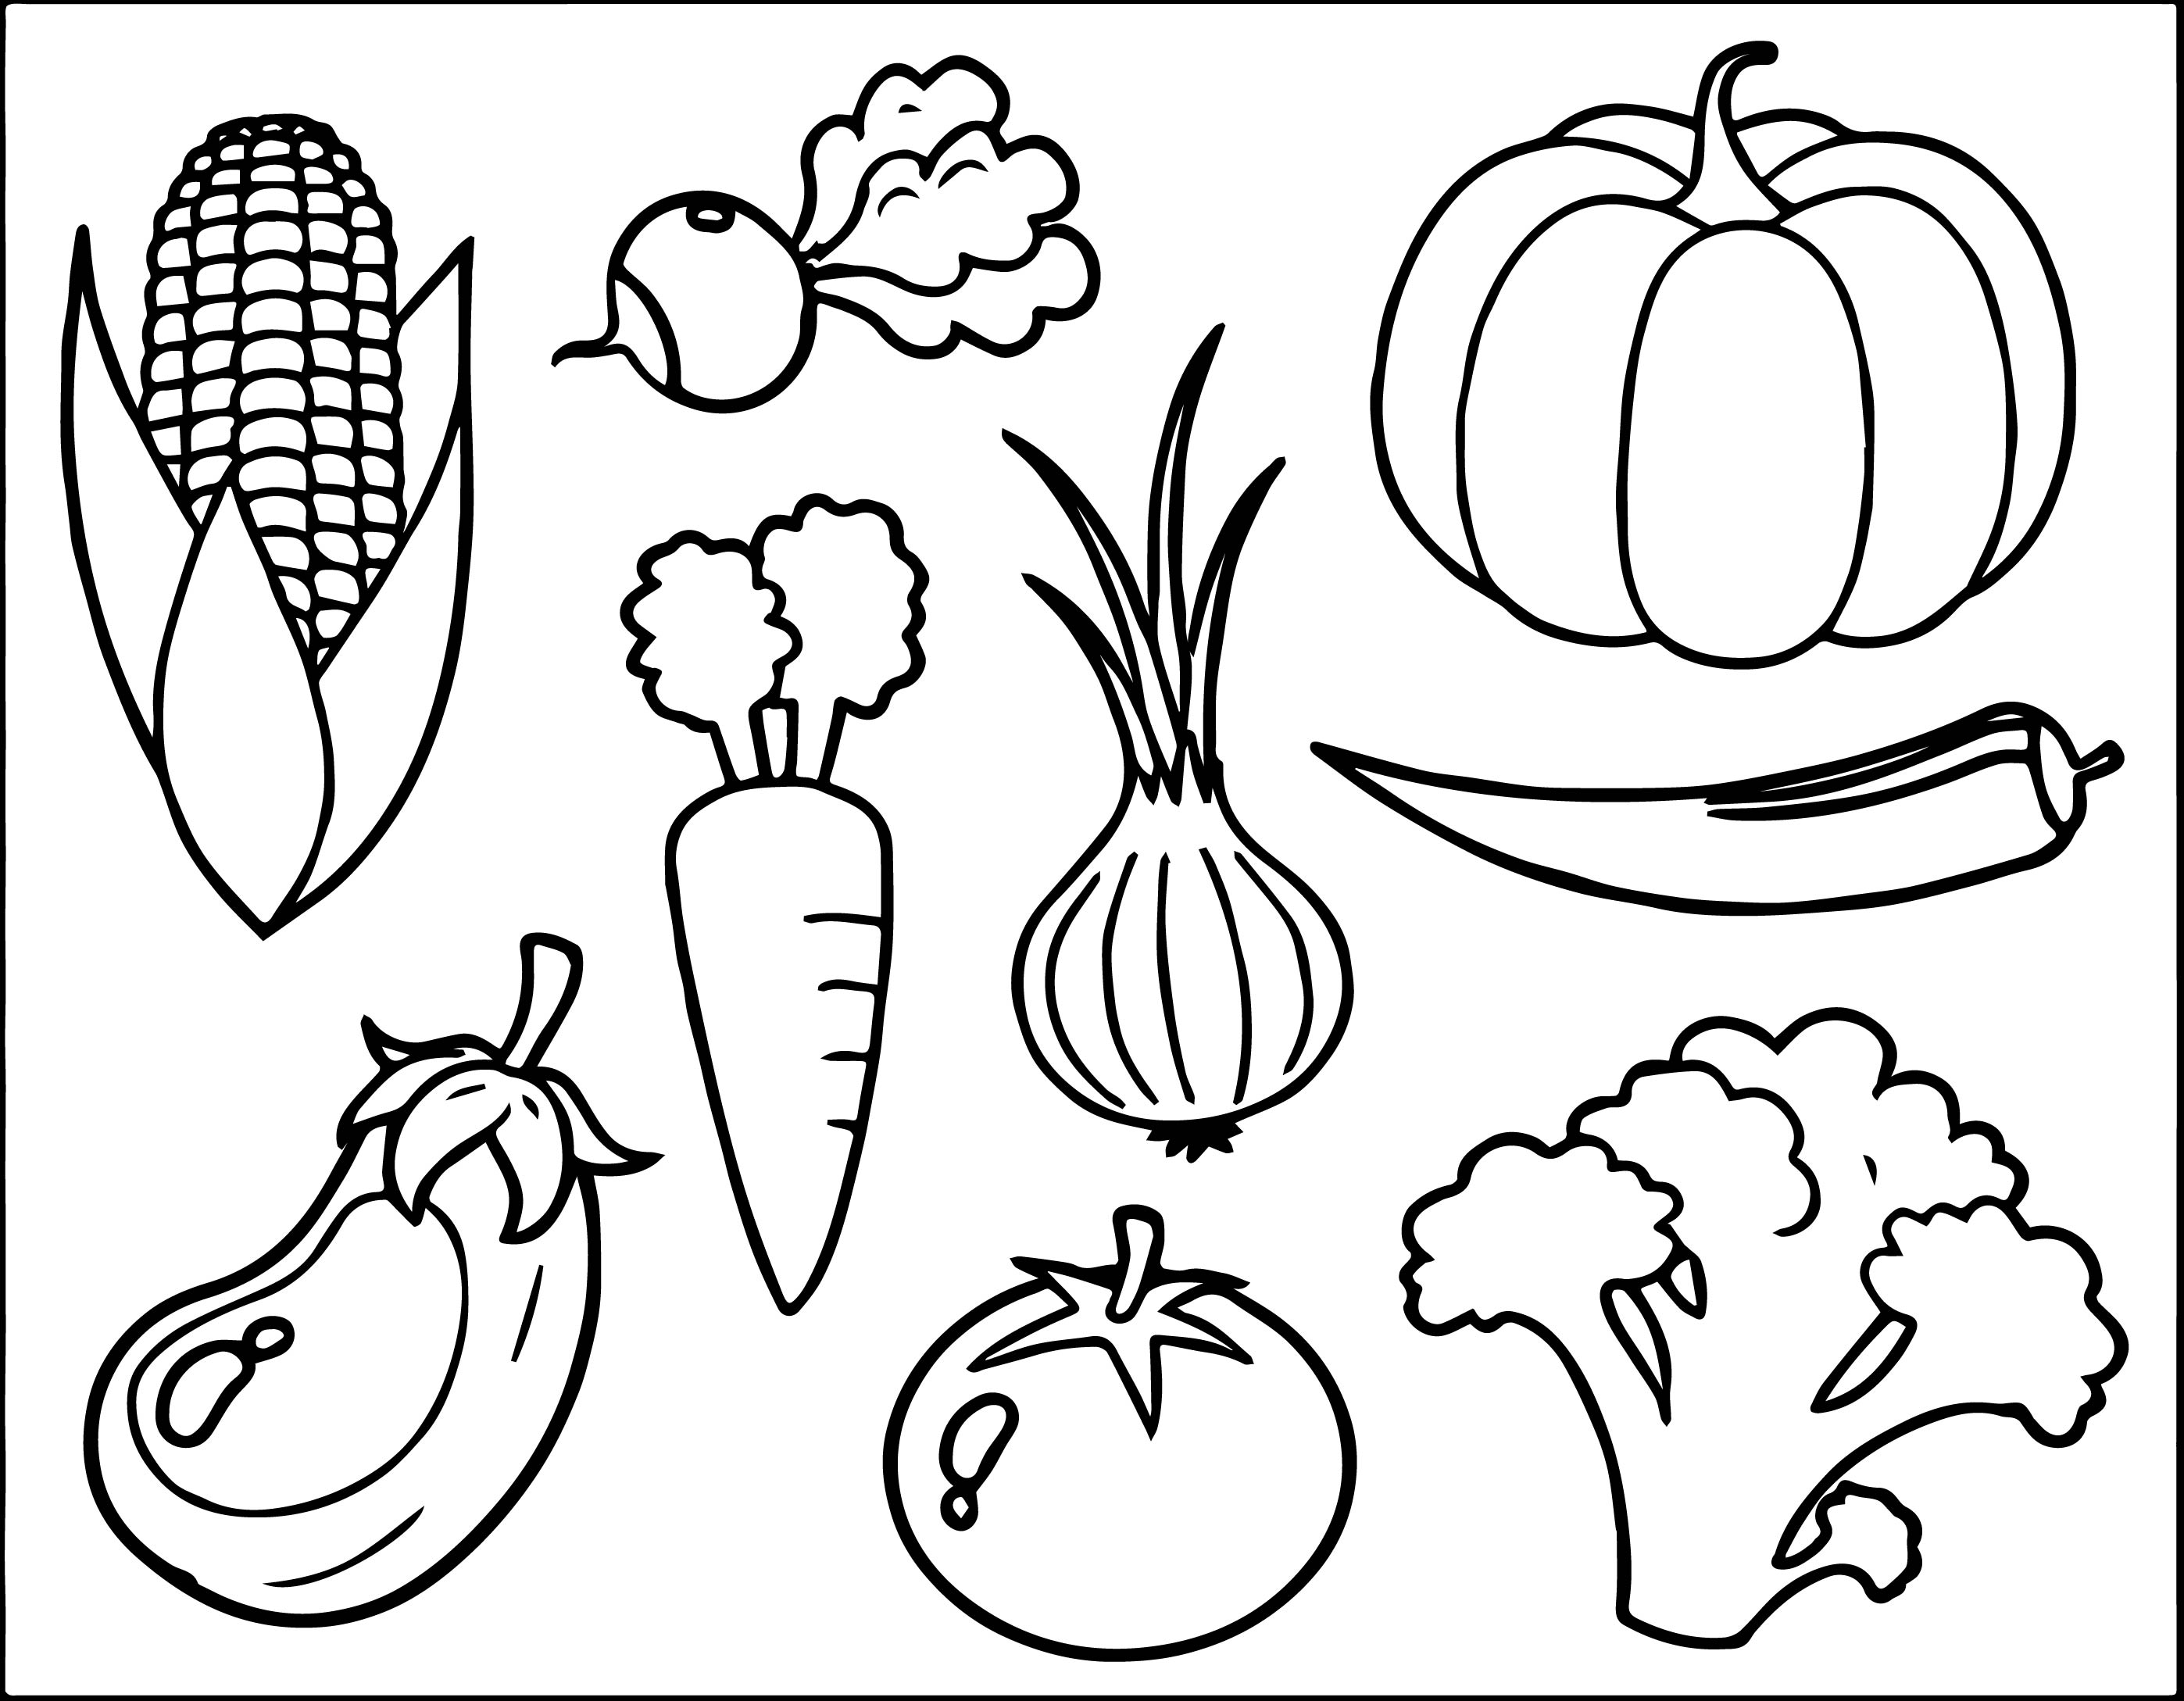 free-printable-vegetable-pictures-printable-word-searches